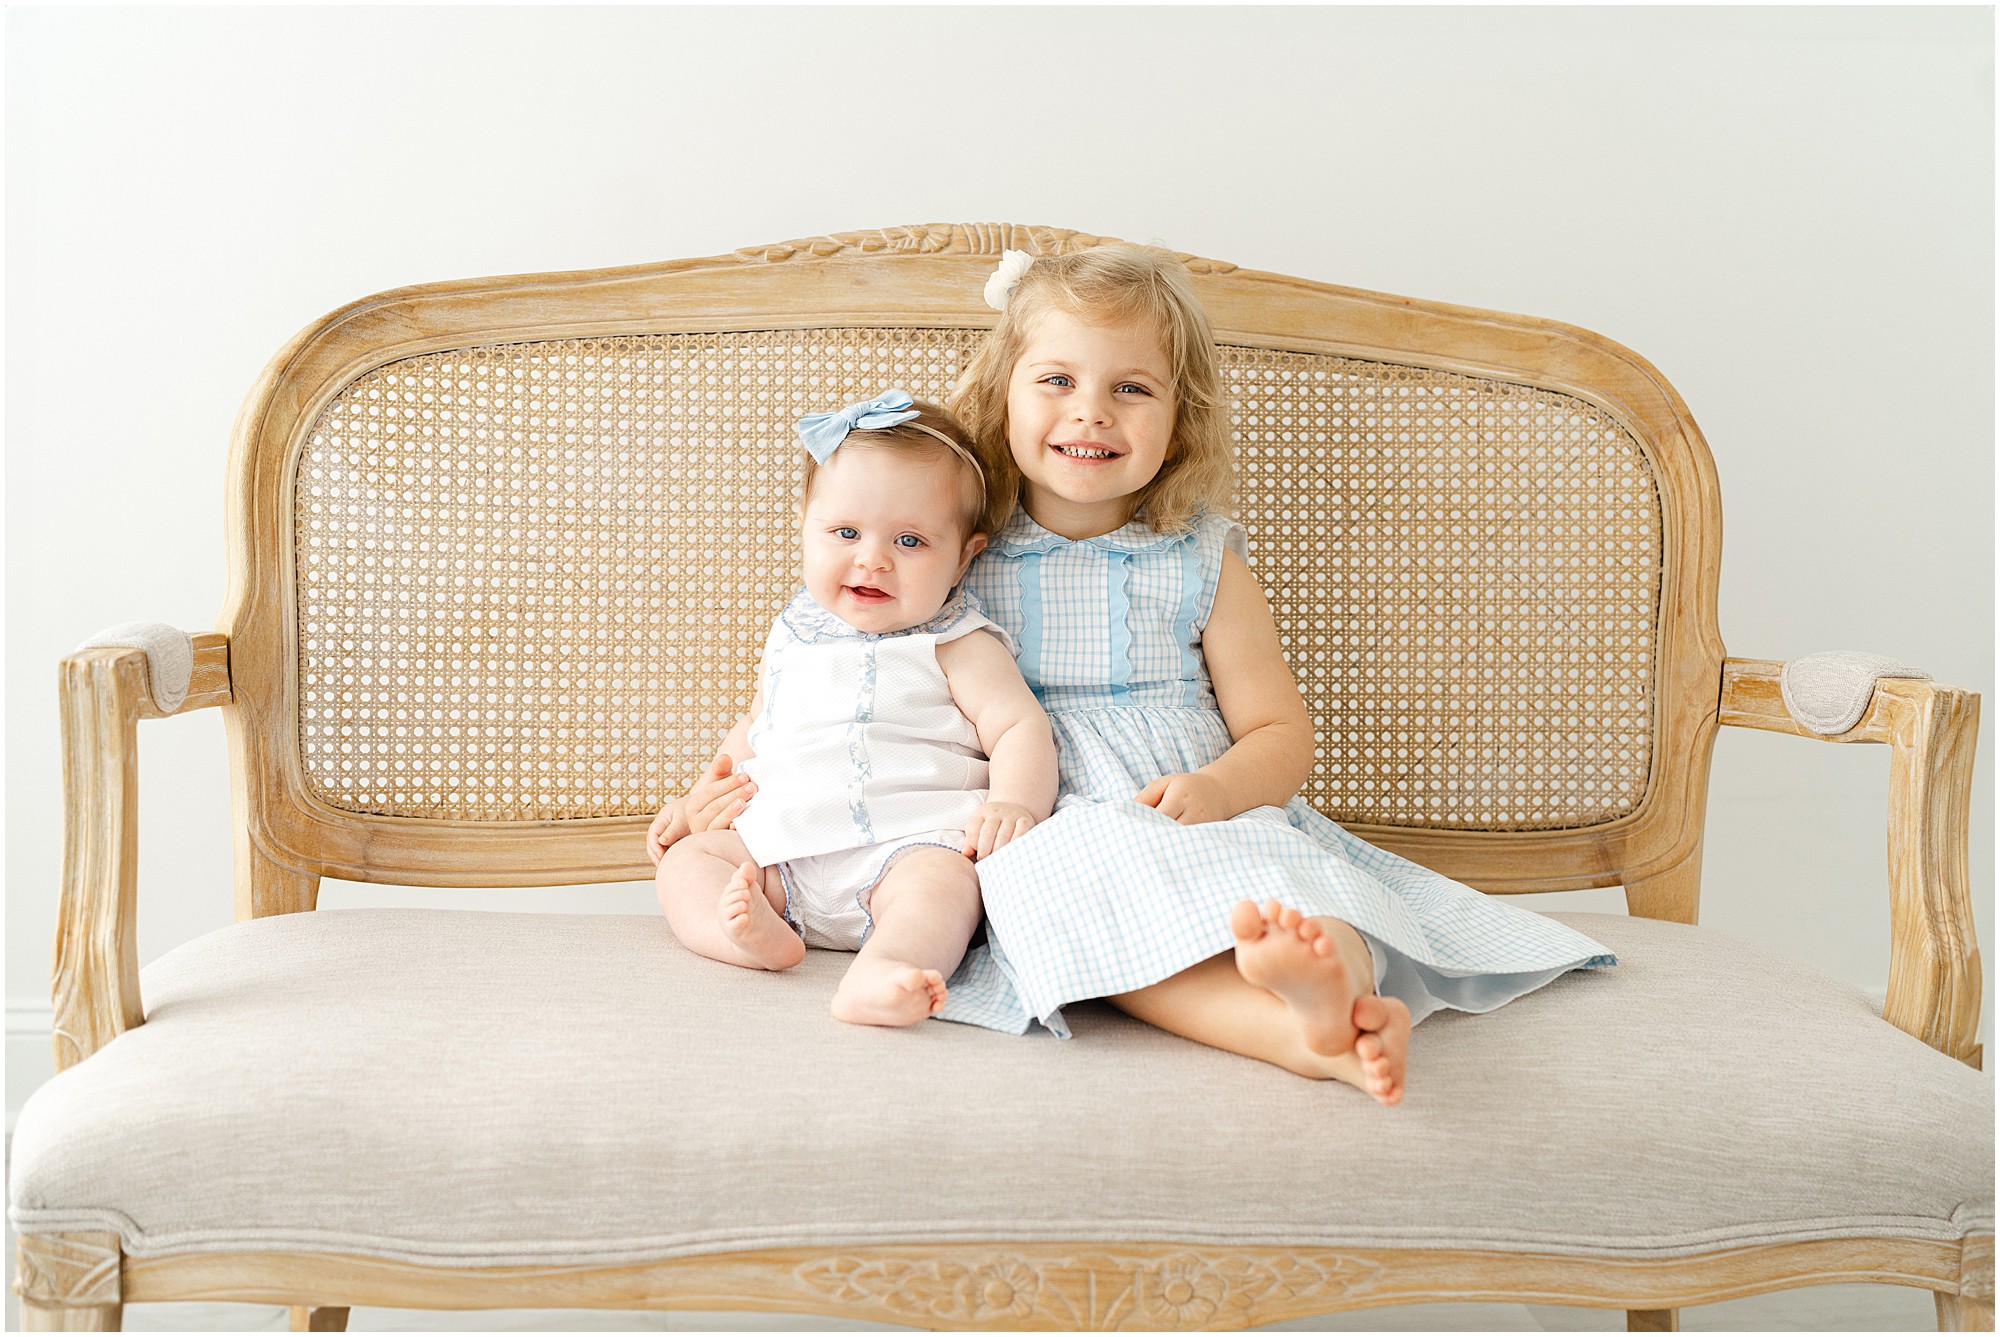 Portrait of a baby and her toddler sister on a bench in a Marietta GA photography studio.